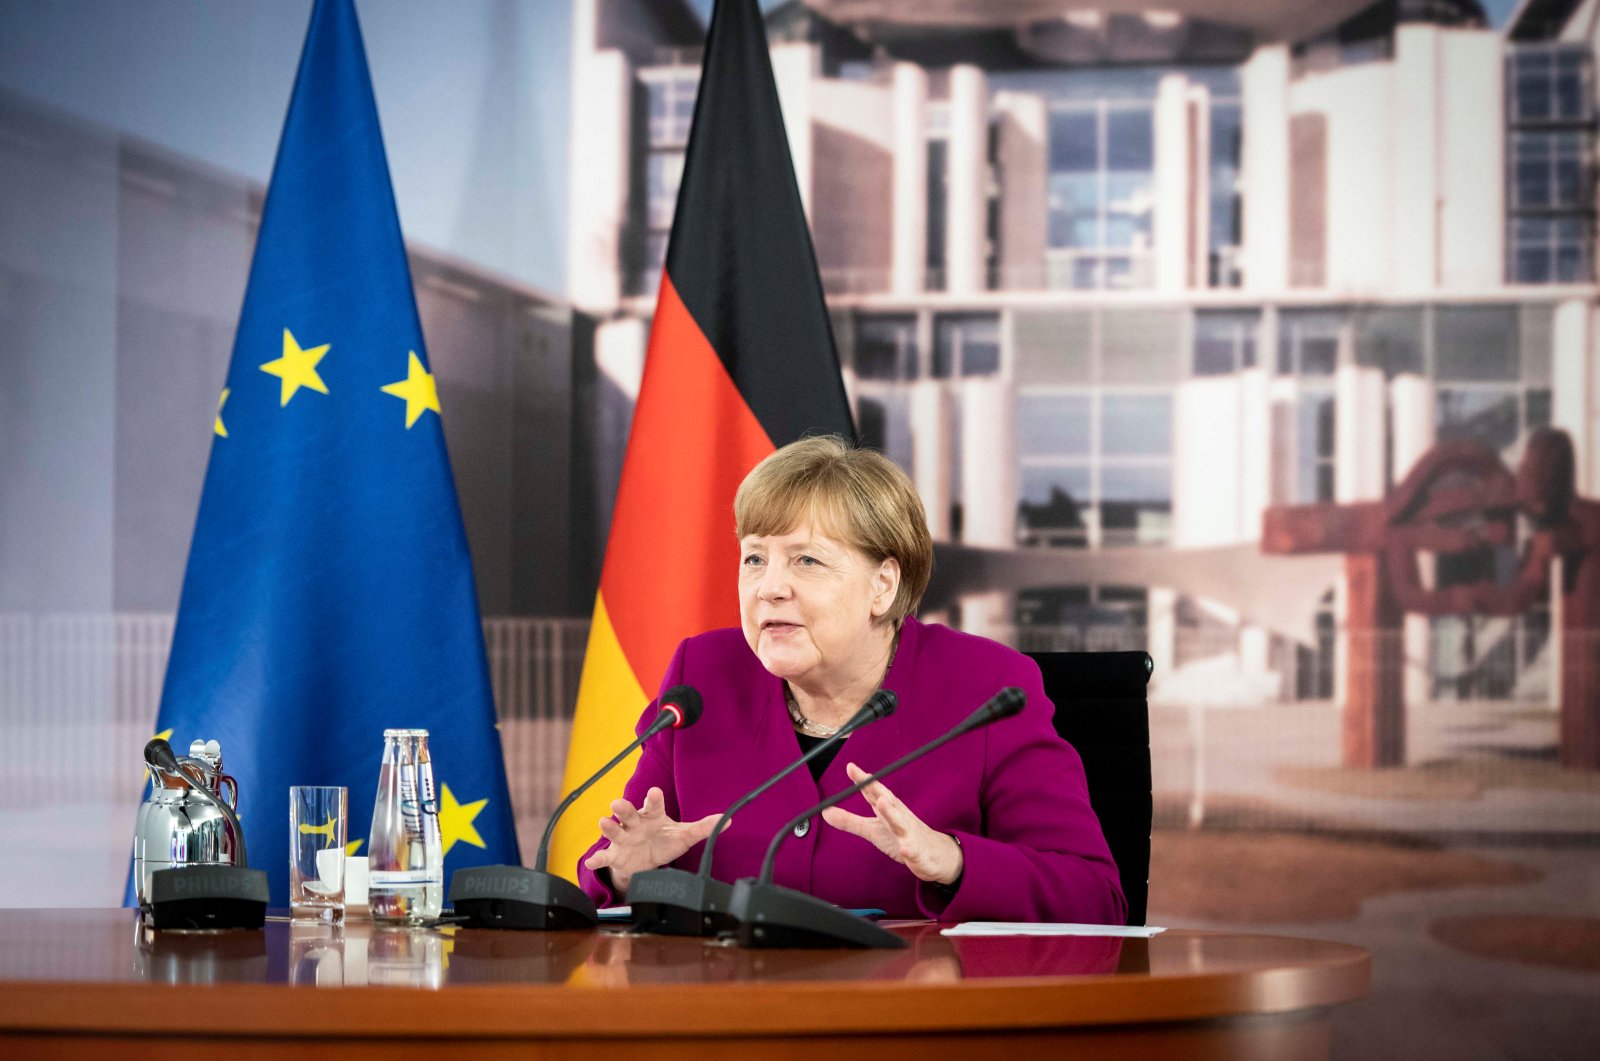 A handout picture shows German Chancellor Angela Merkel talking to French President Emmanuel Macron during a joint video conference in the chancellery in Berlin, May 18, 2020. (REUTERS Photo)